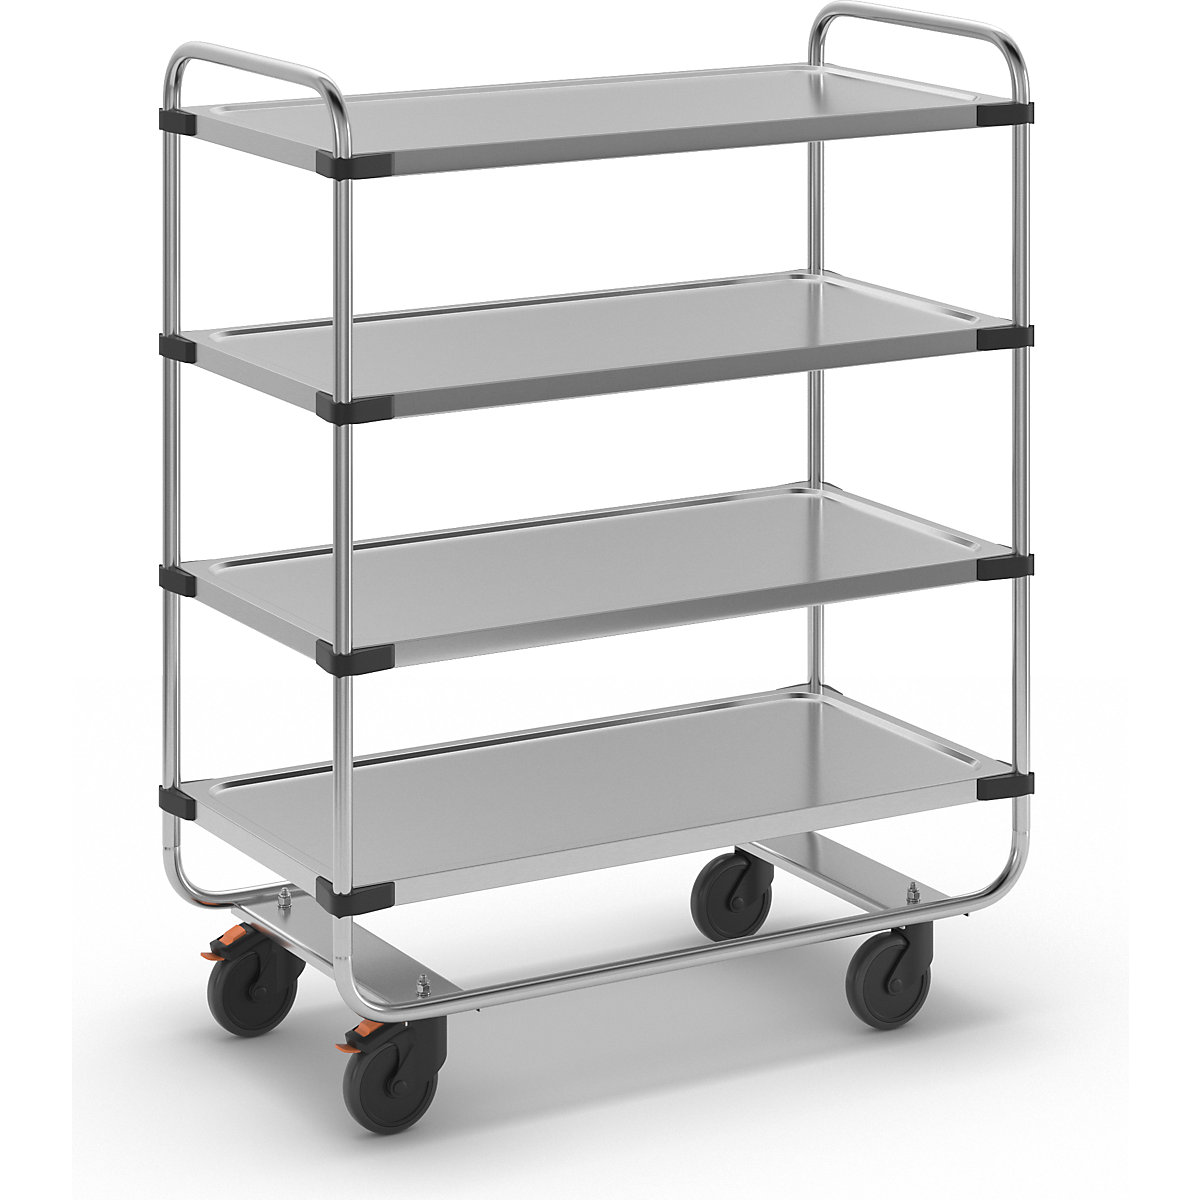 Stainless steel serving trolley, assembled